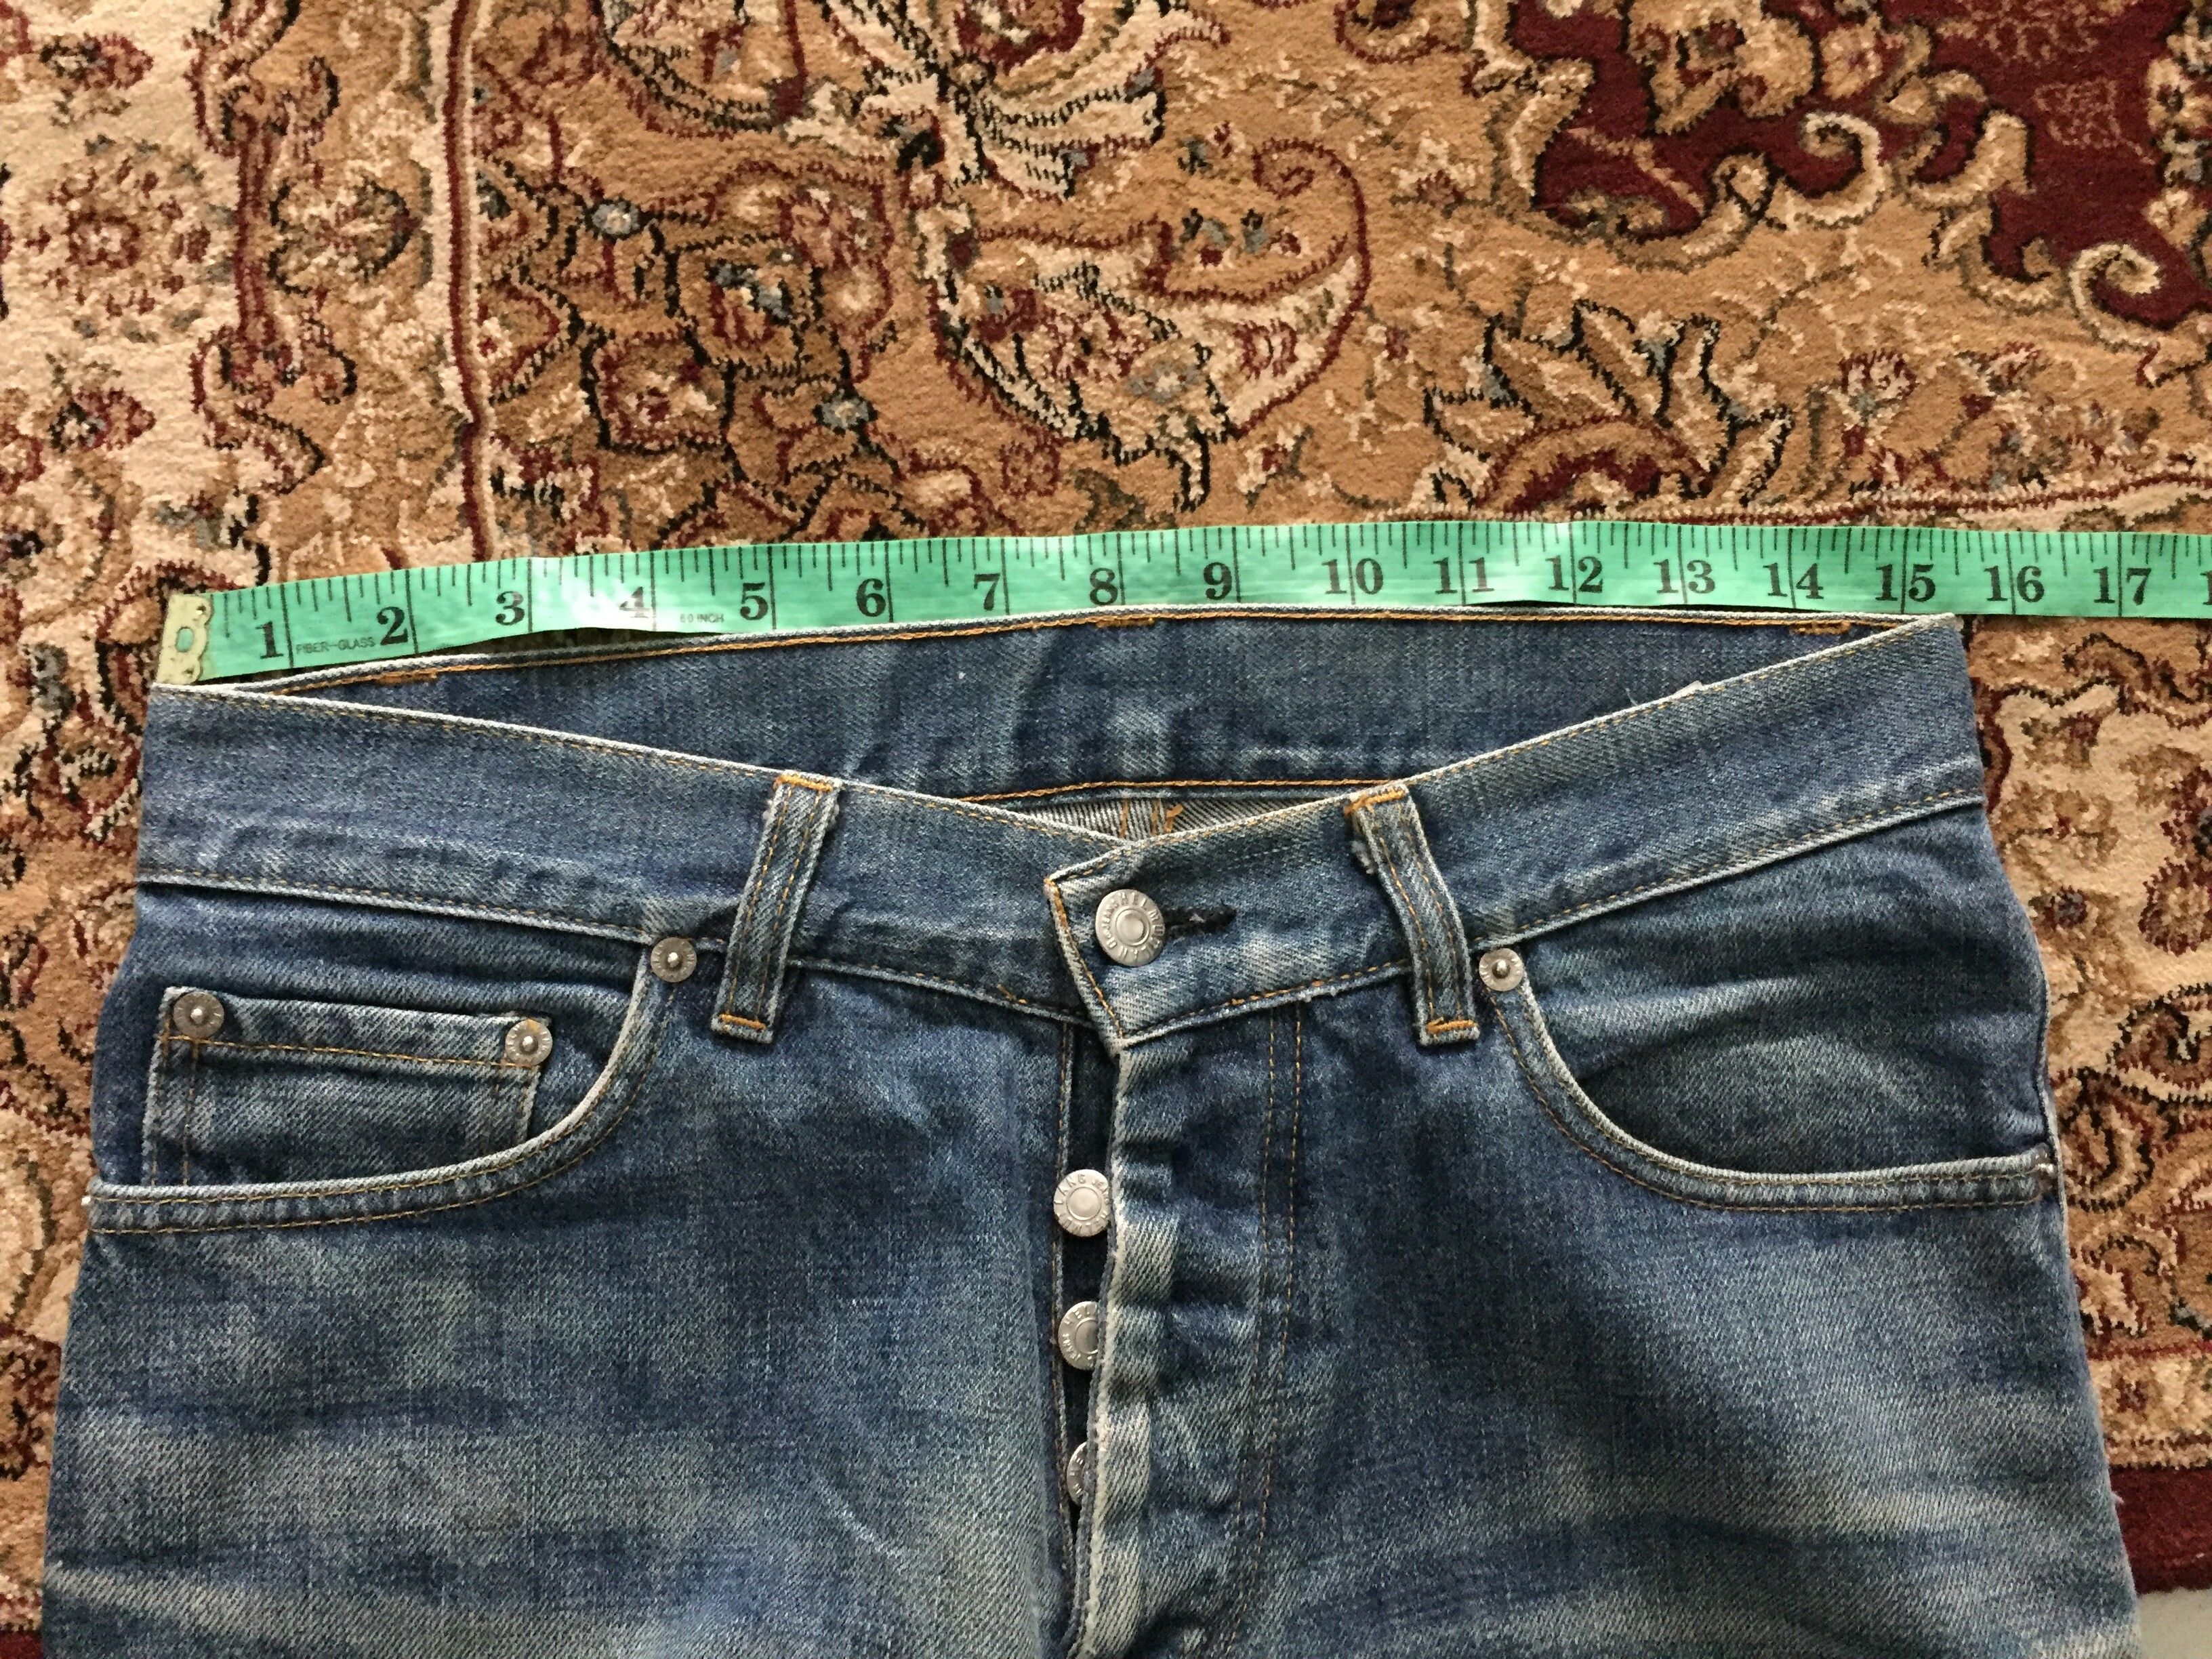 Helmut Lang SS98 faded denim Size US 29 - 11 Preview